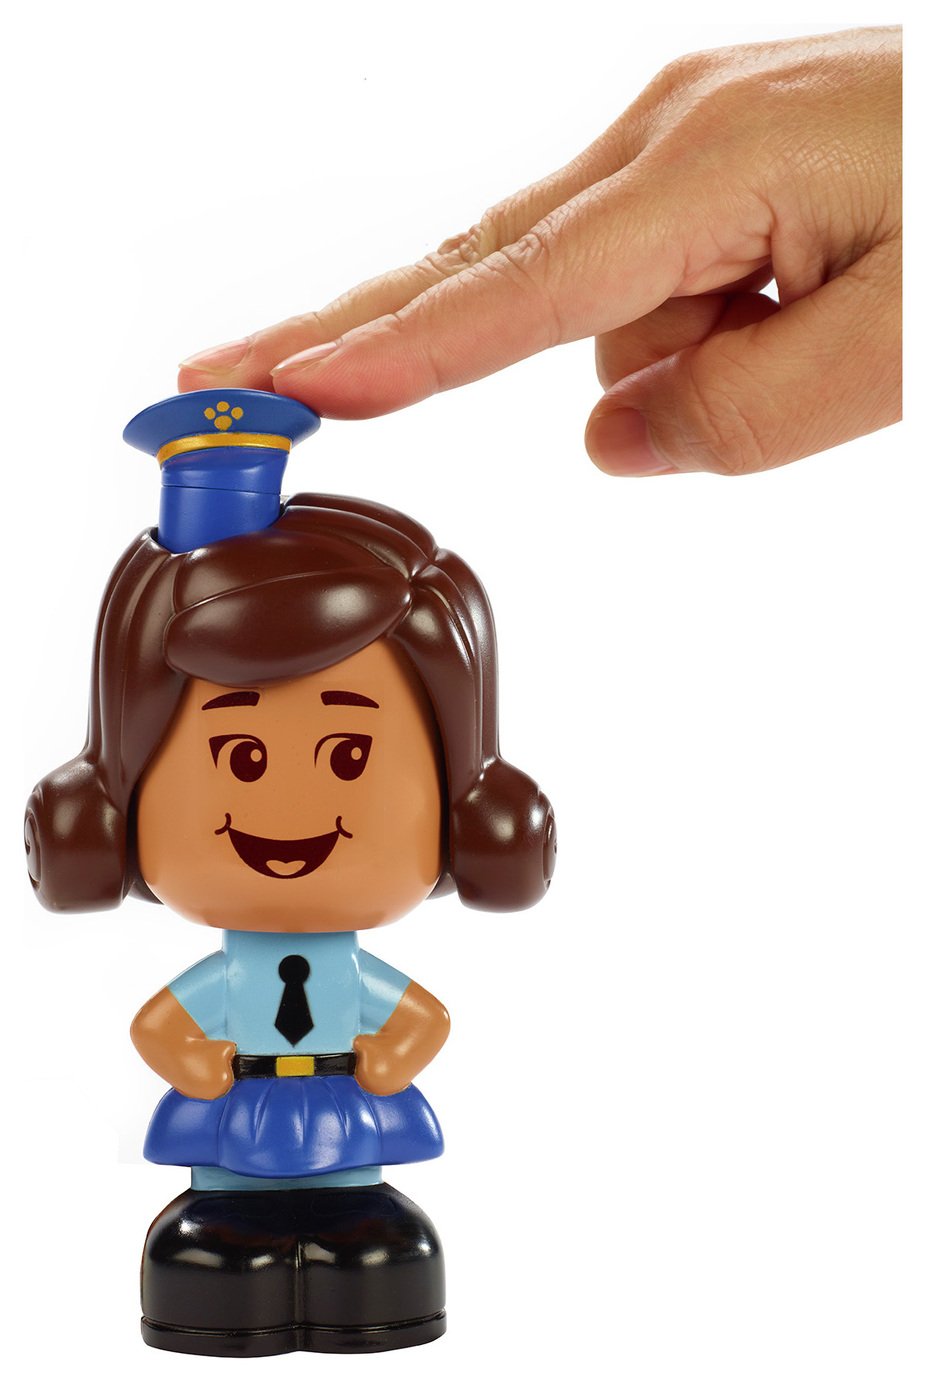 Details about  / Disney Pixar Toy Story Talking Officer Giggle McDimples